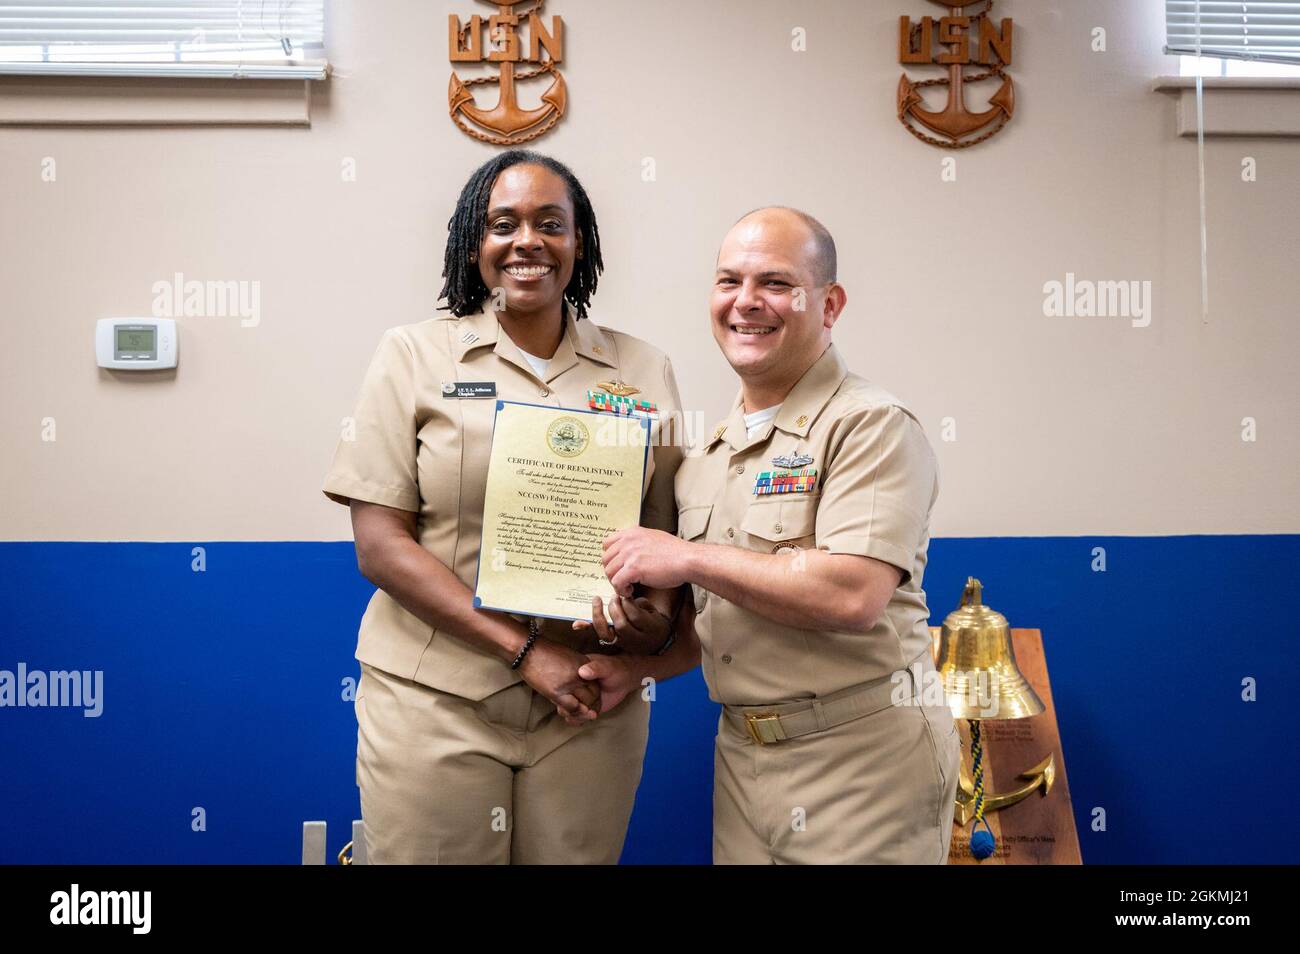 WASHINGTON, DC (May 27, 2021) – Lt. Takana Jefferson (left), Naval Support Activity Washington chaplain, and Chief Navy Counselor Eduardo Rivera (right) pose together with Rivera’s certificate of reenlistment onboard Washington Navy Yard. Stock Photo